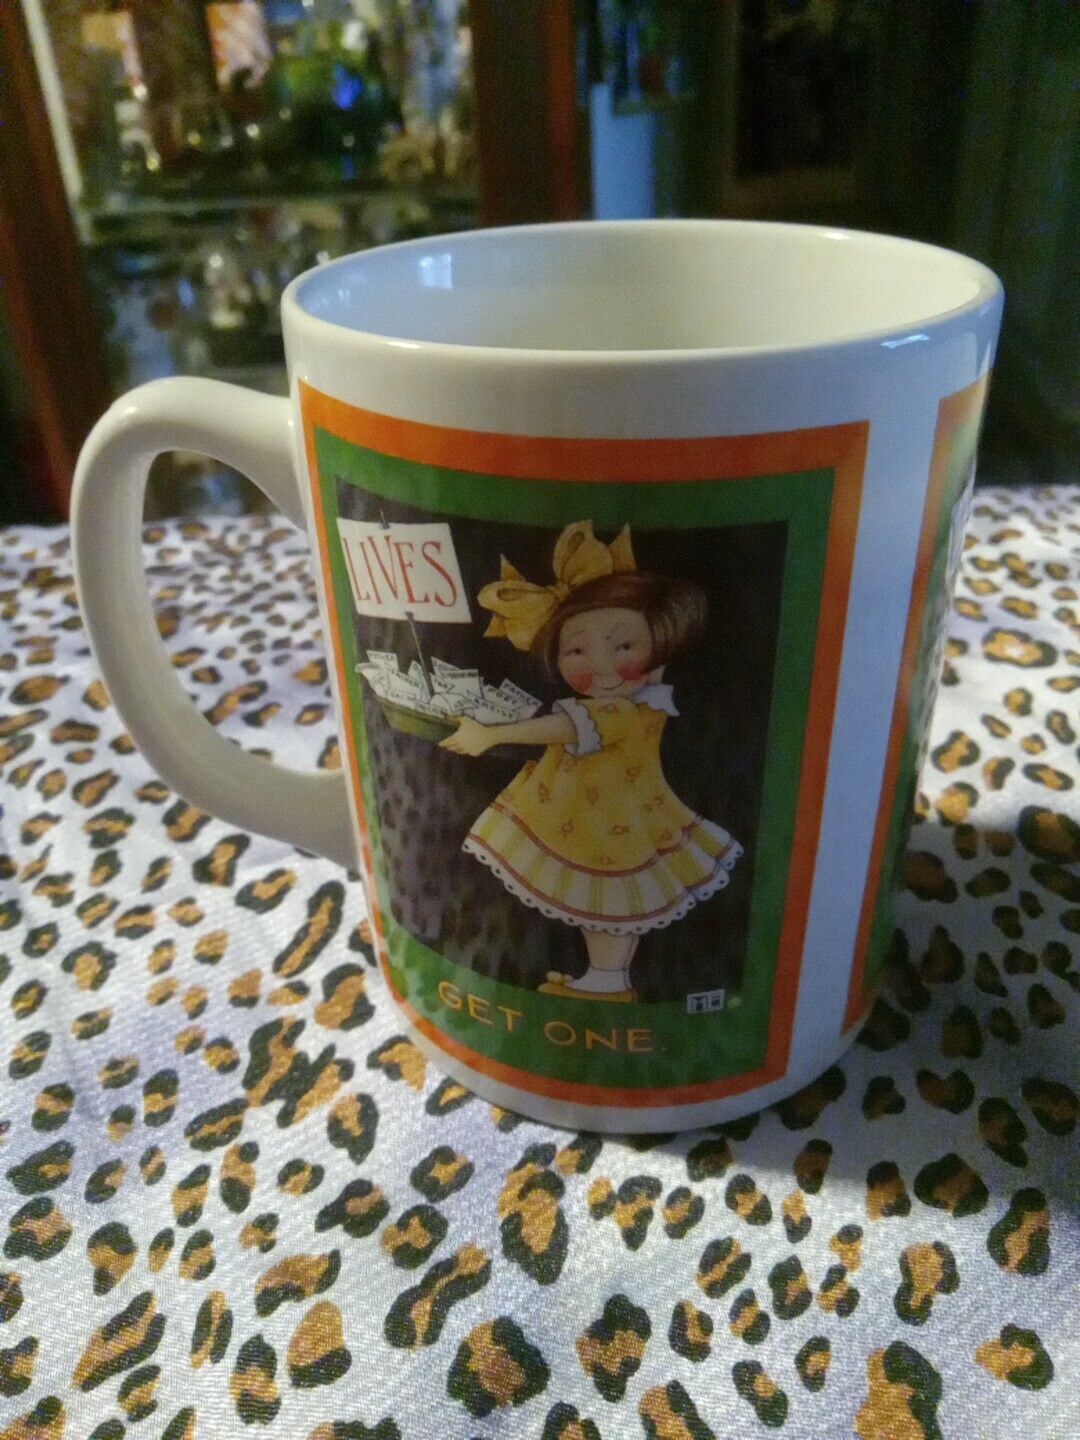 Mary Engelbright Mug - (Lives Get One W/ Checkered Handle) Unique Drink Cup